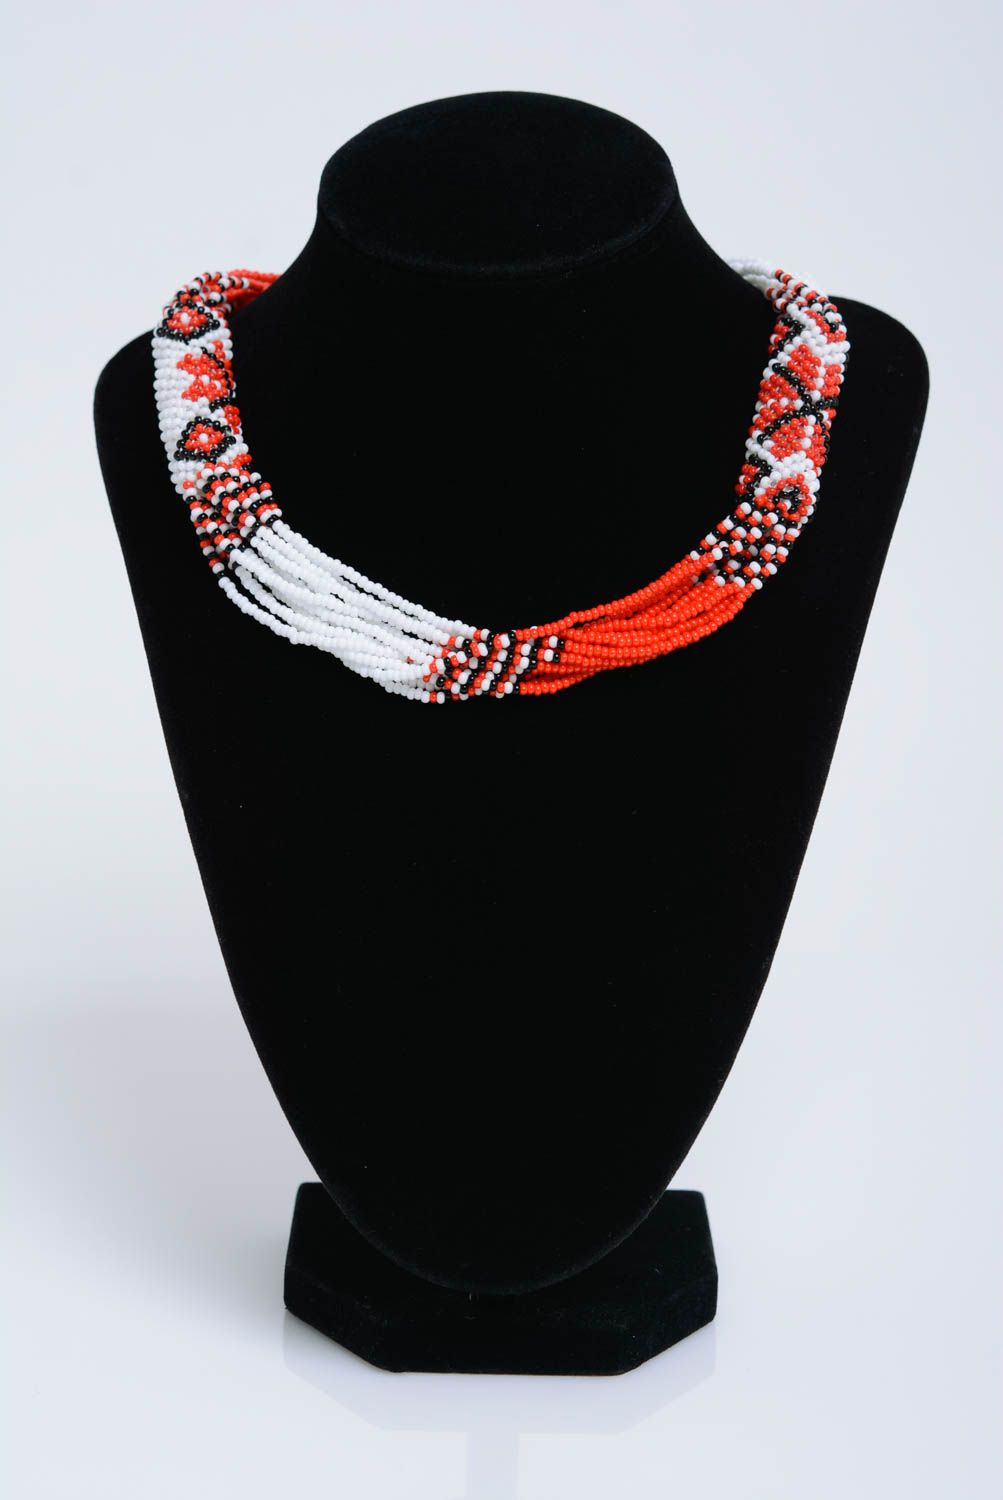 Beaded handmade designer necklace with colorful pattern in ethnic style photo 3